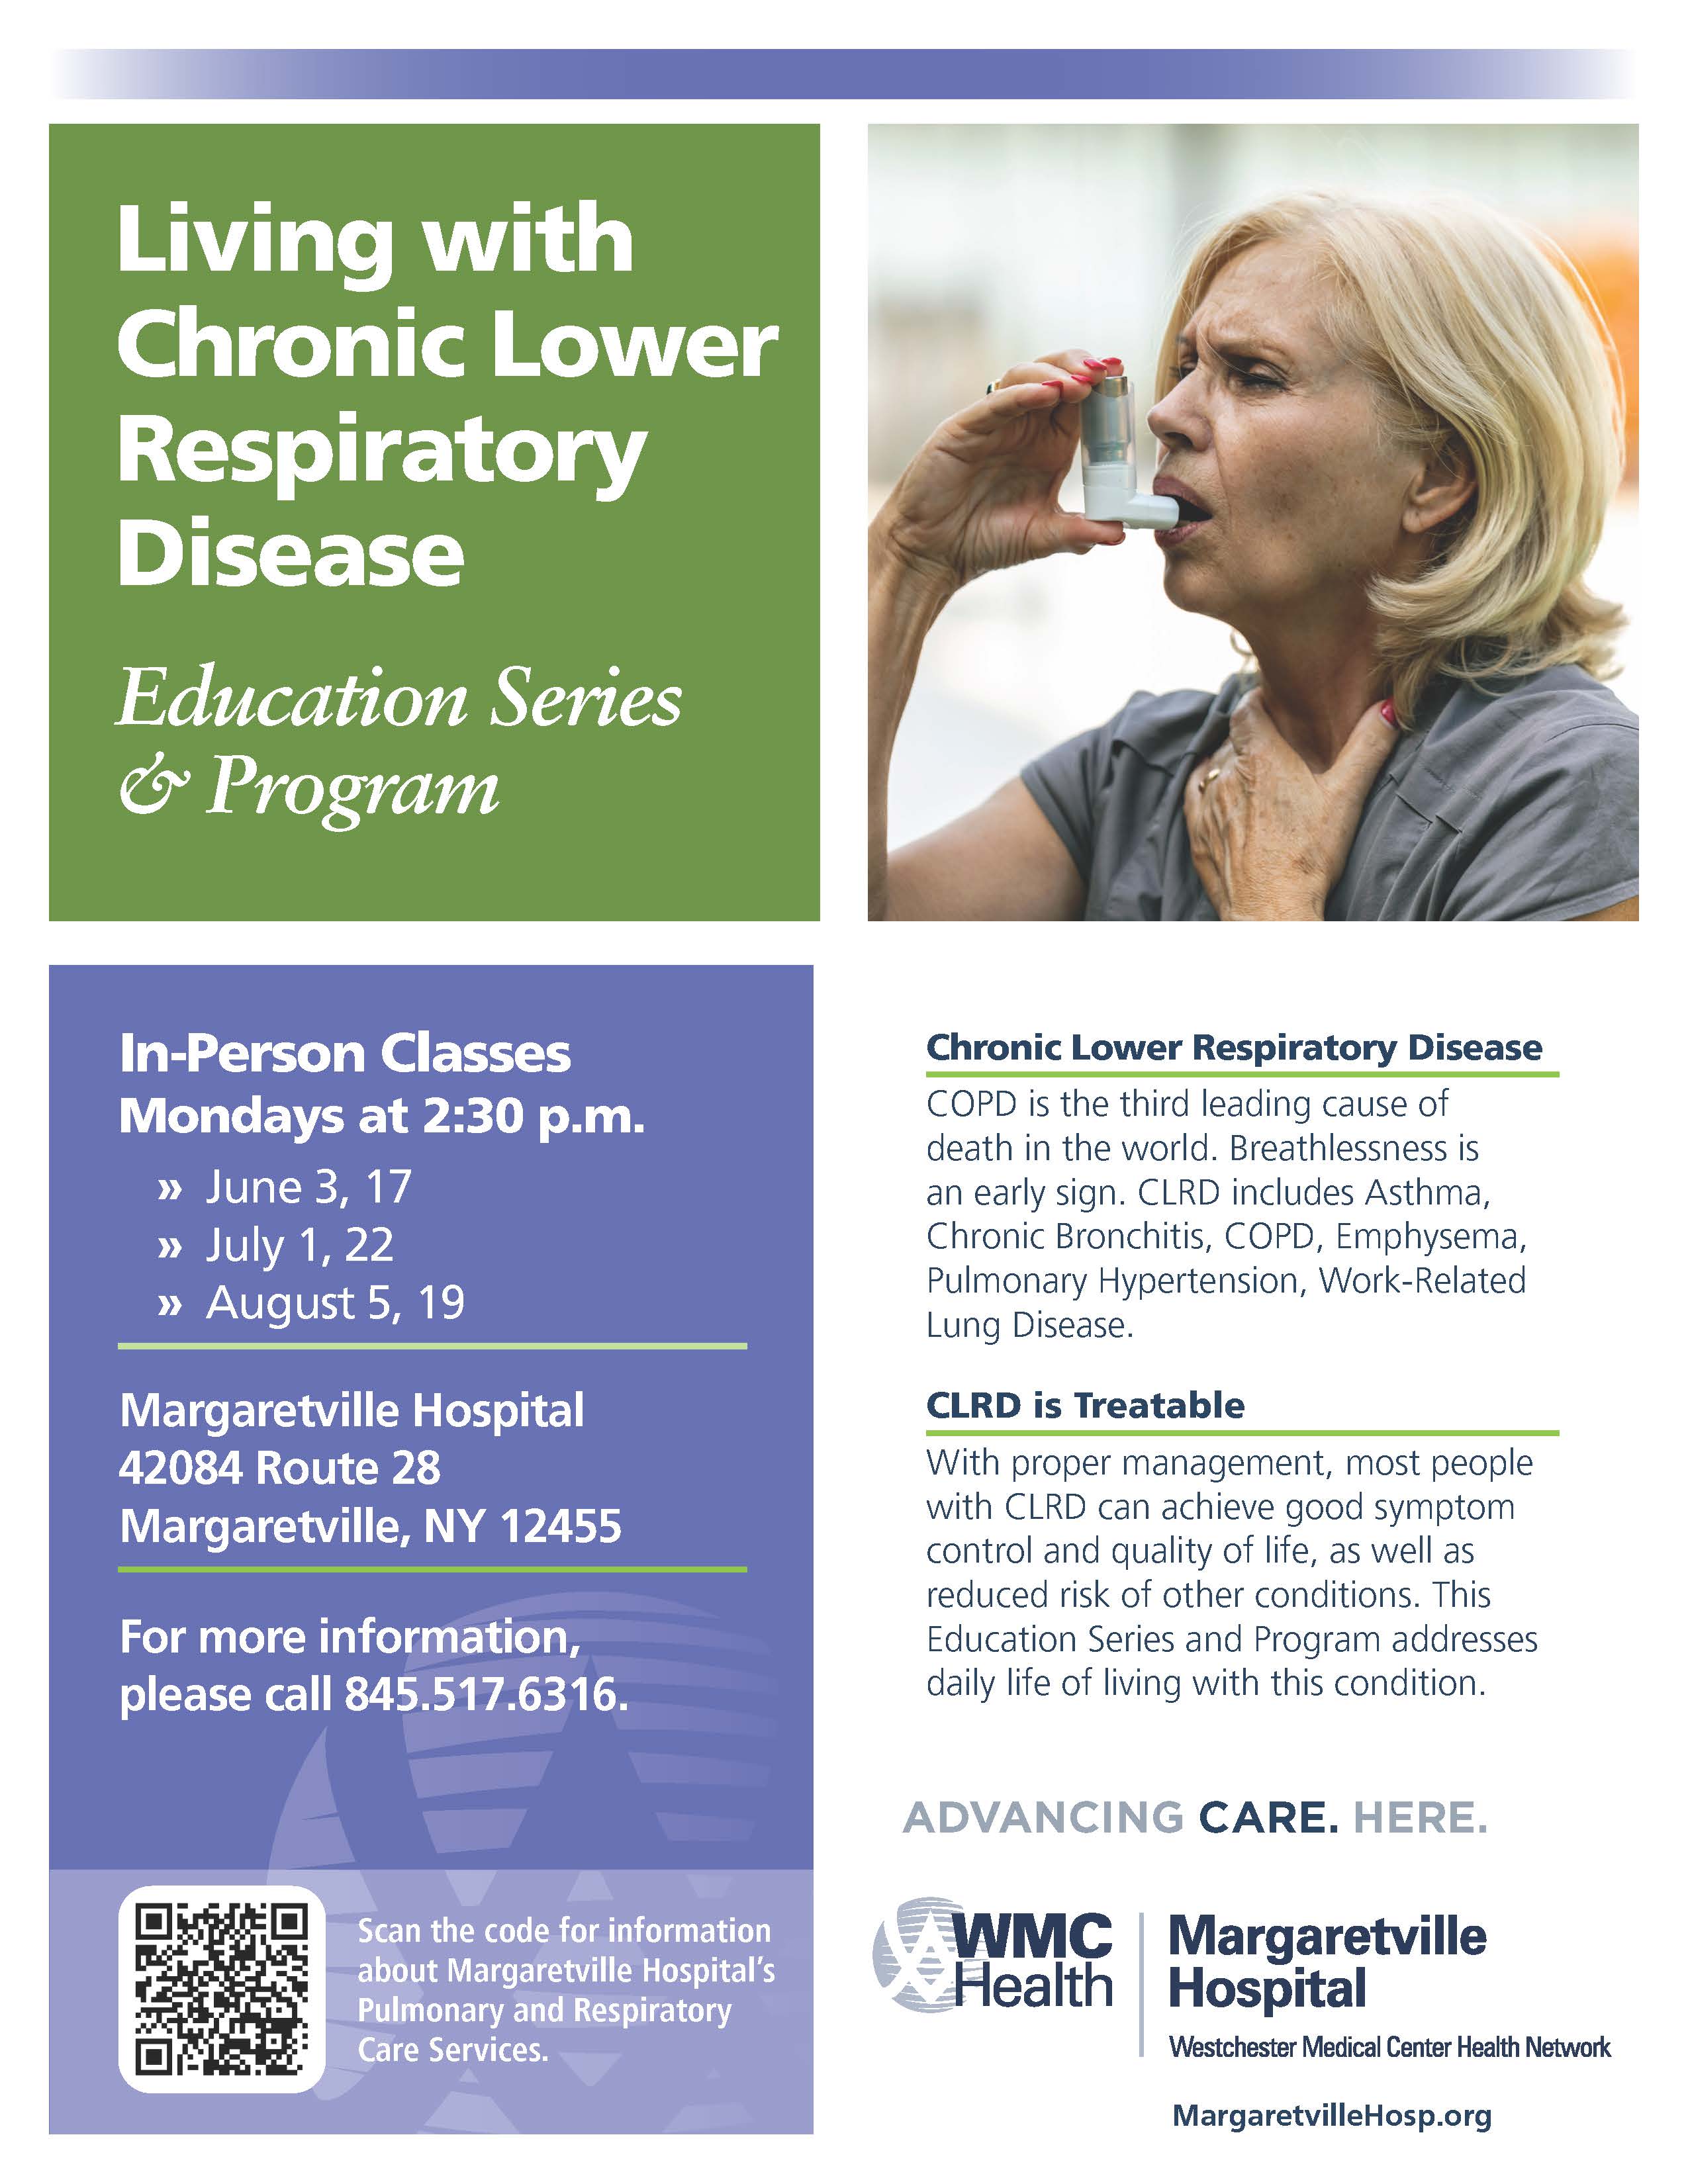 Living with Chronic Lower Respiratory Disease